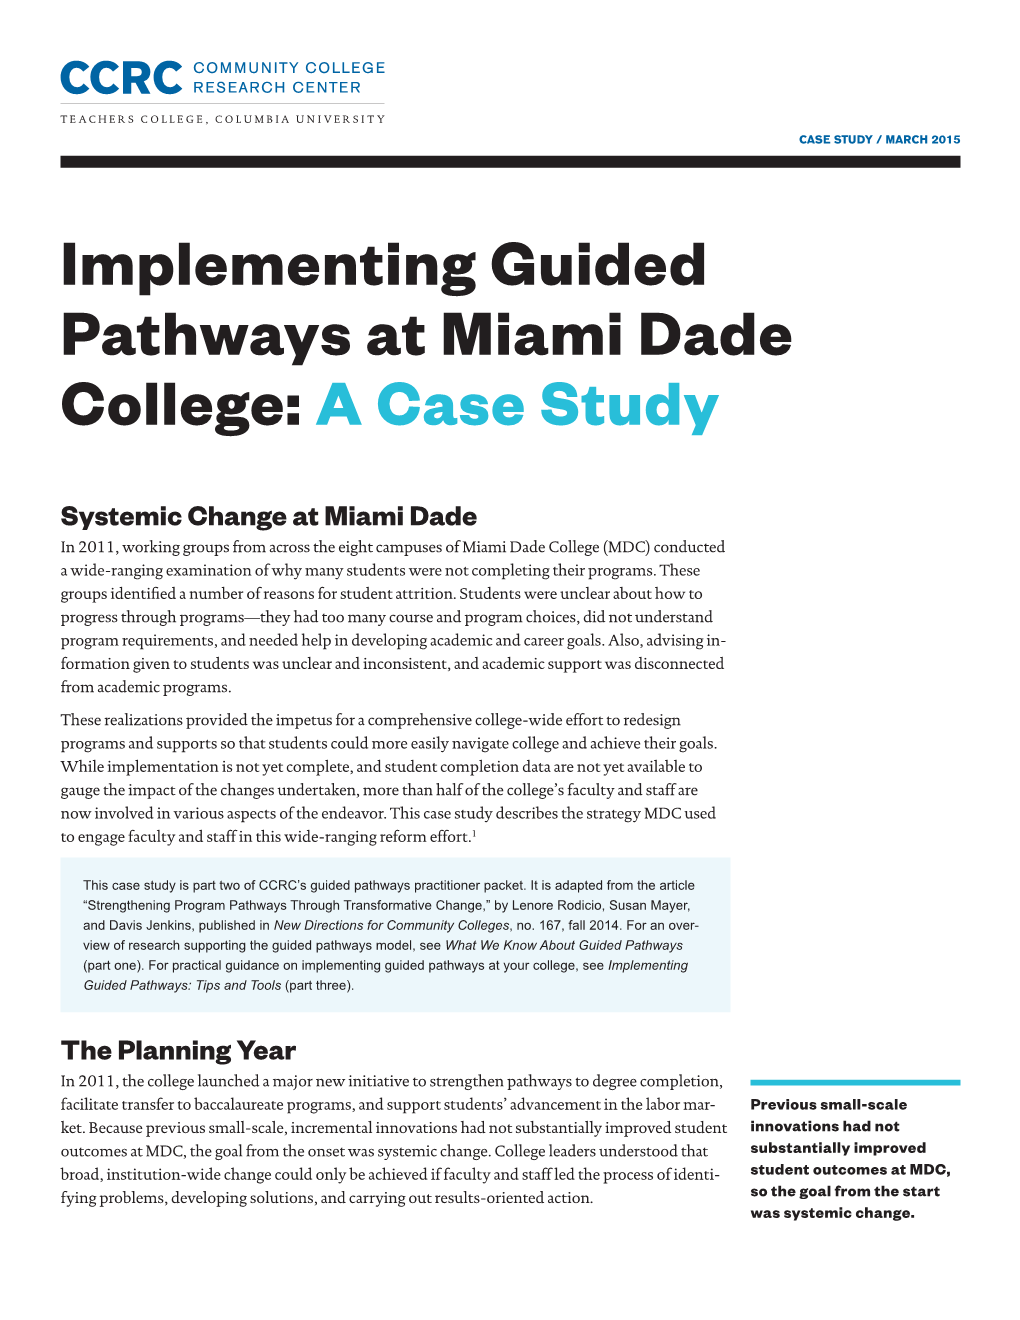 Implementing Guided Pathways at Miami Dade College: a Case Study